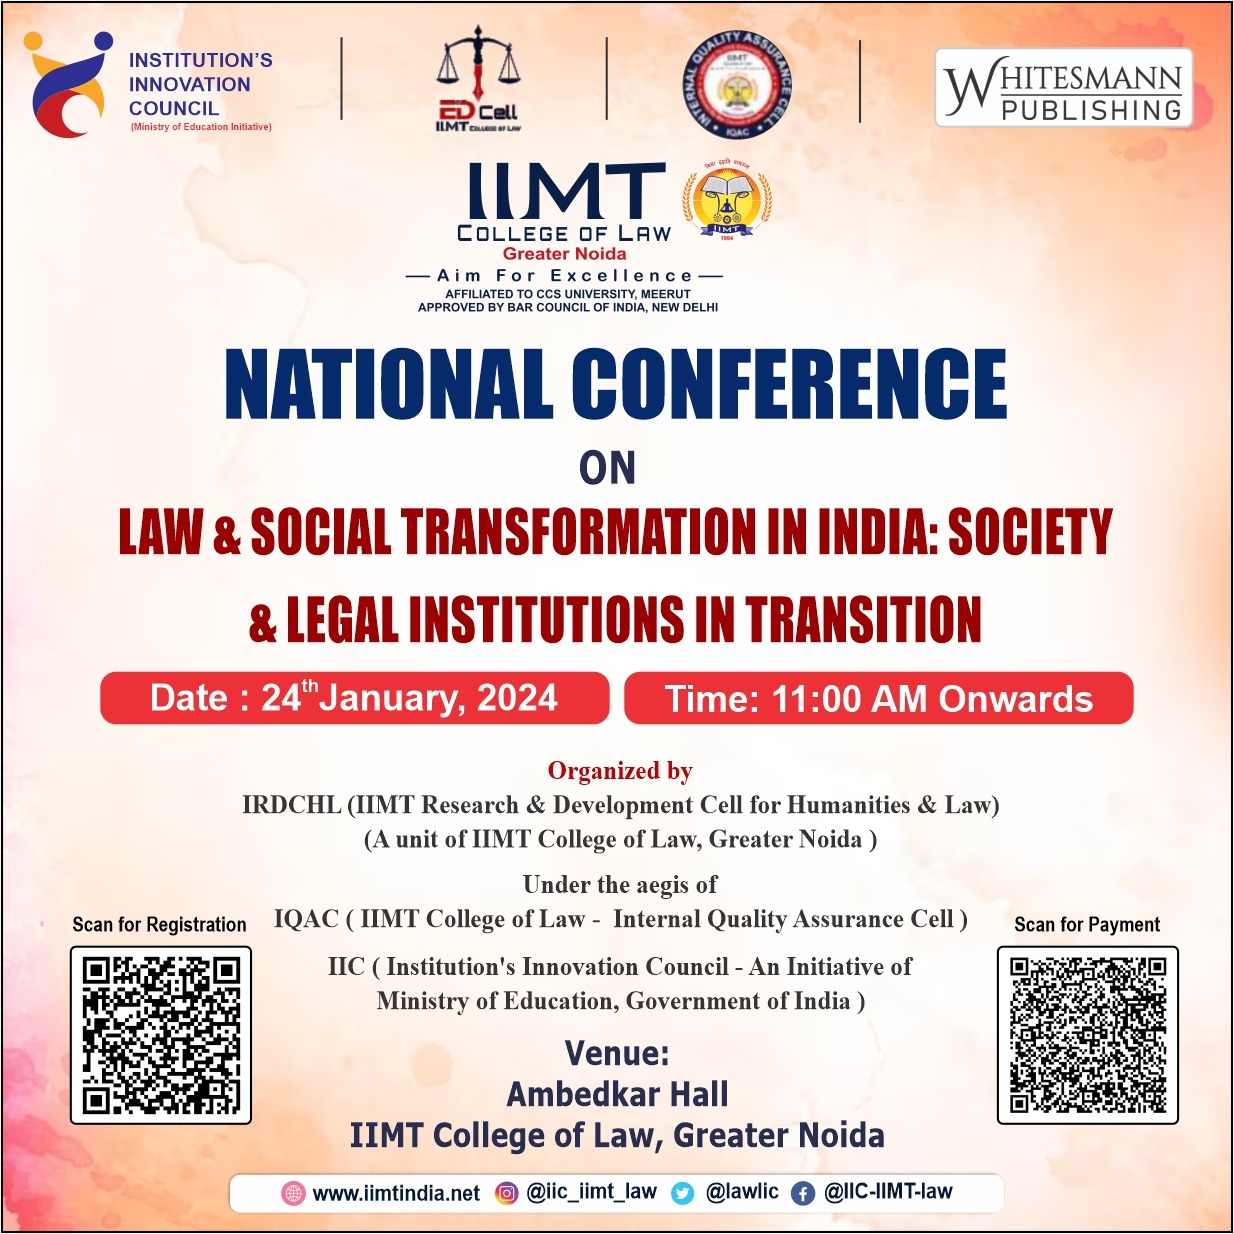 National Conference on Law & Social Transformation in India: Society & Legal Institutions in Transit